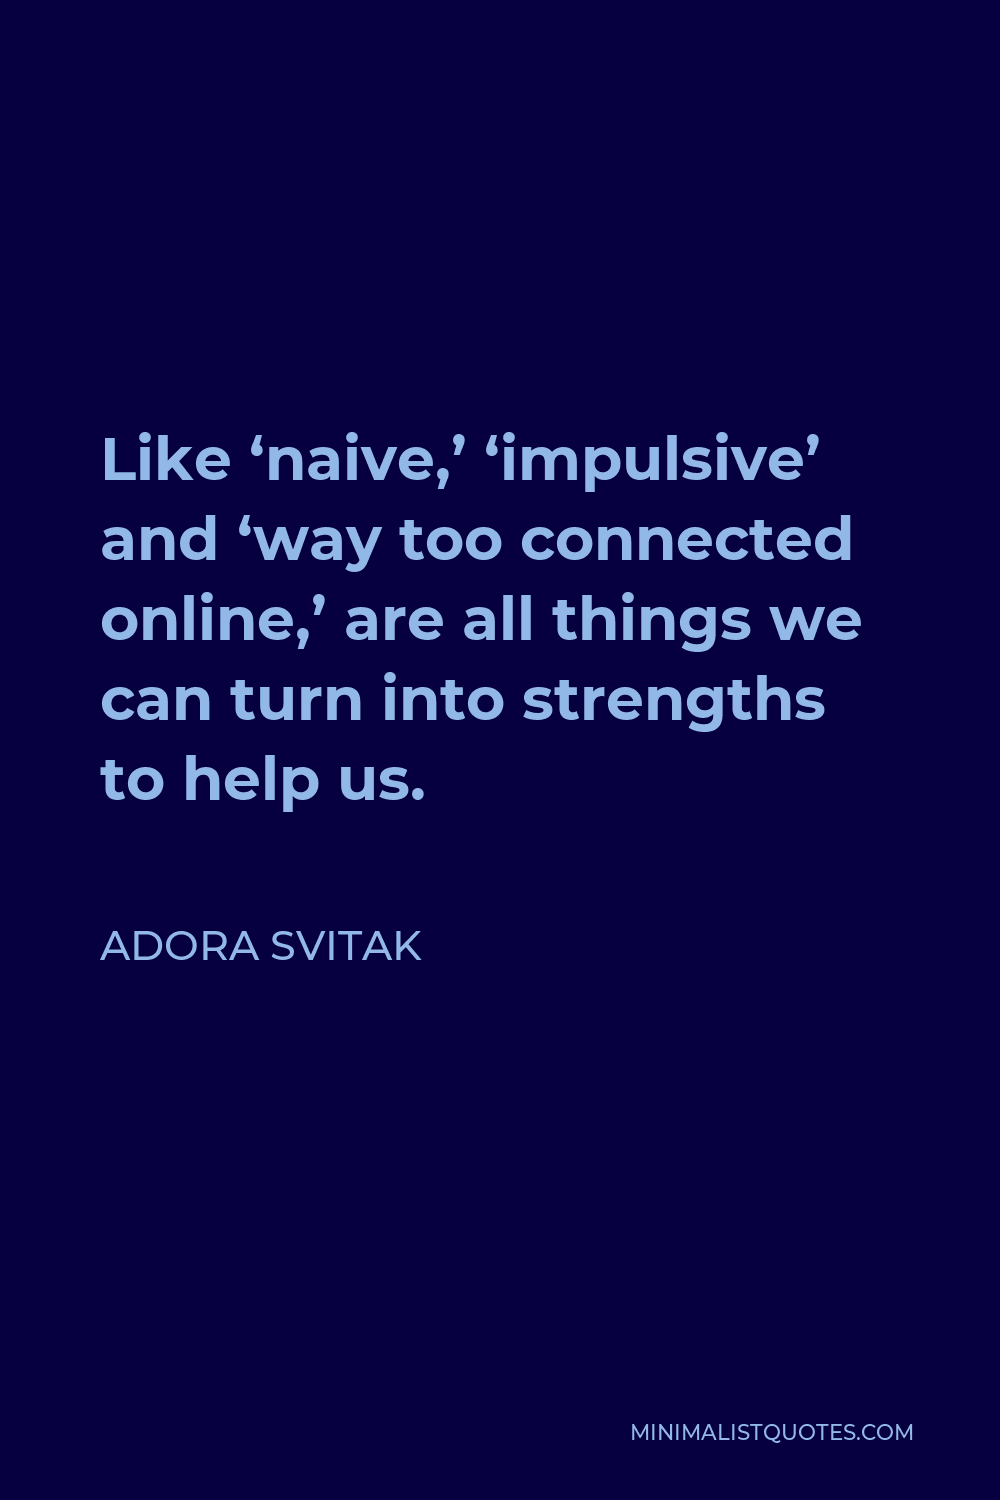 Adora Svitak Quote - Like ‘naive,’ ‘impulsive’ and ‘way too connected online,’ are all things we can turn into strengths to help us.